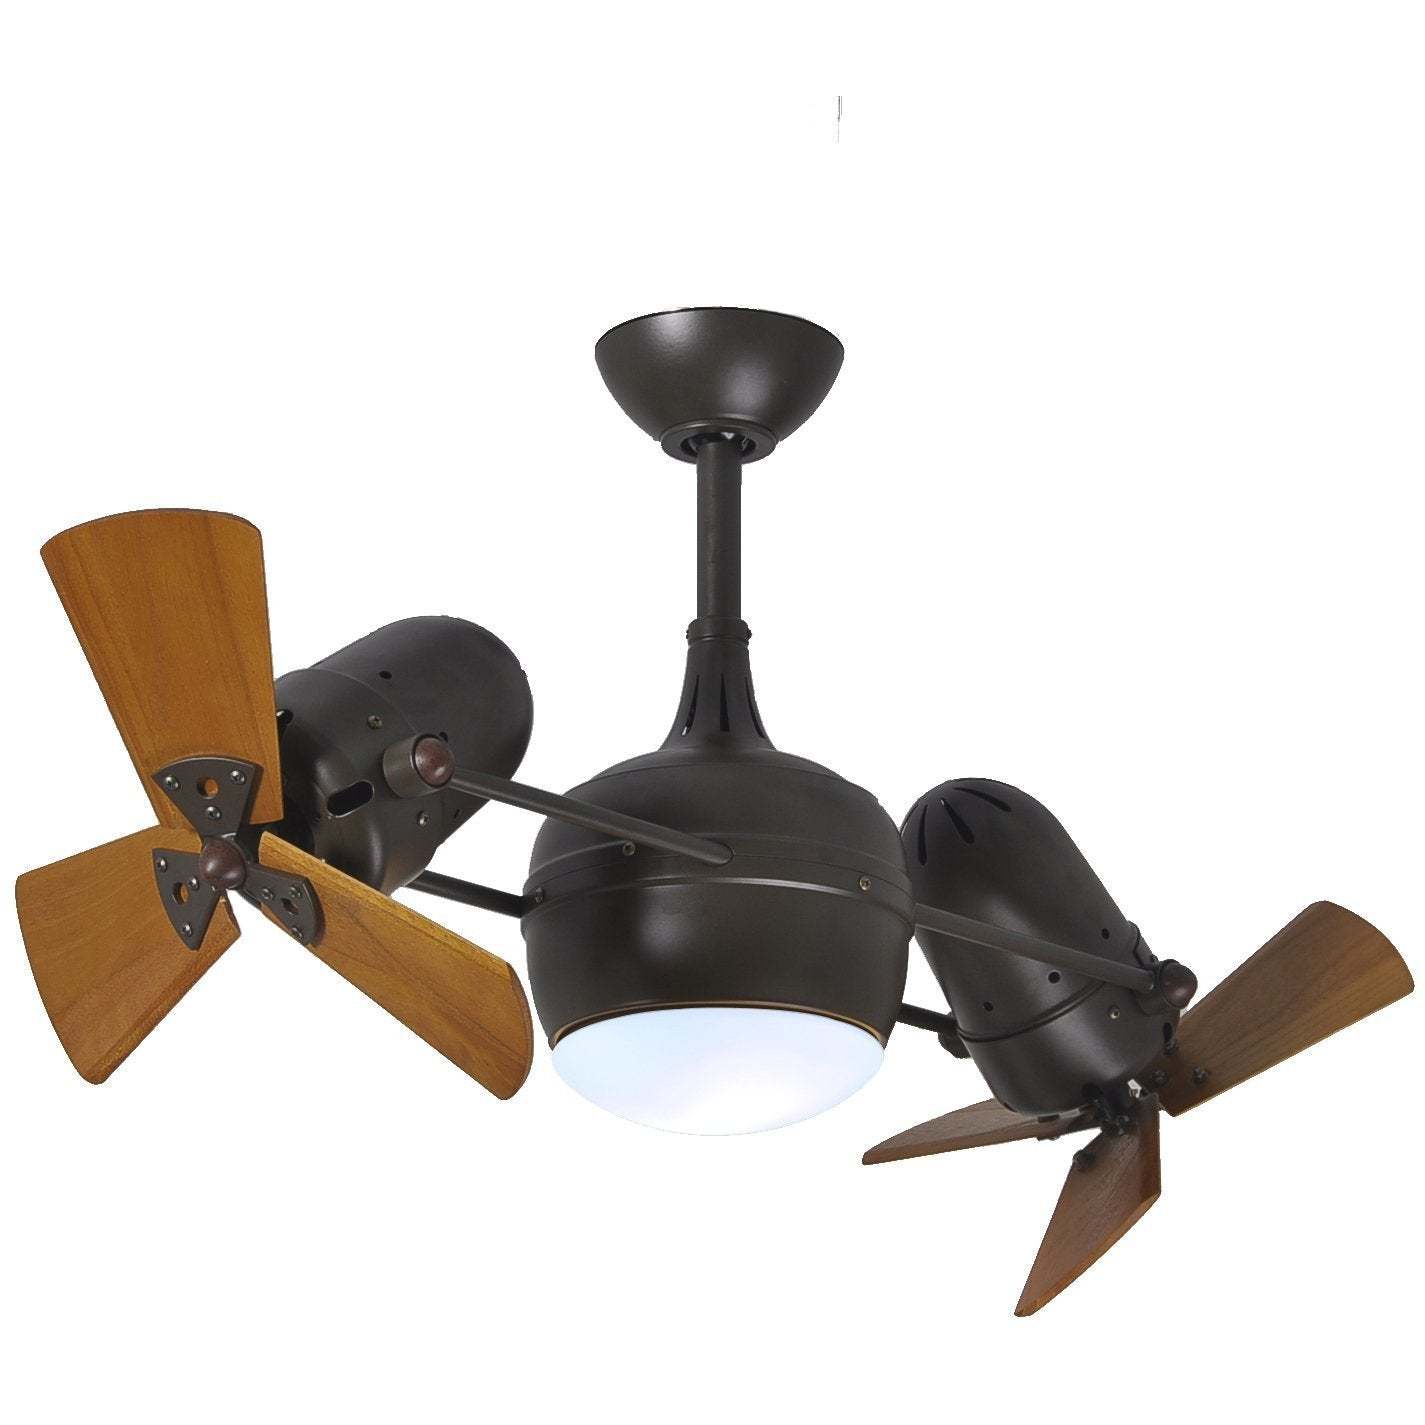 Shown in Textured Bronze with Mahogany Wood Blades and Light Kit